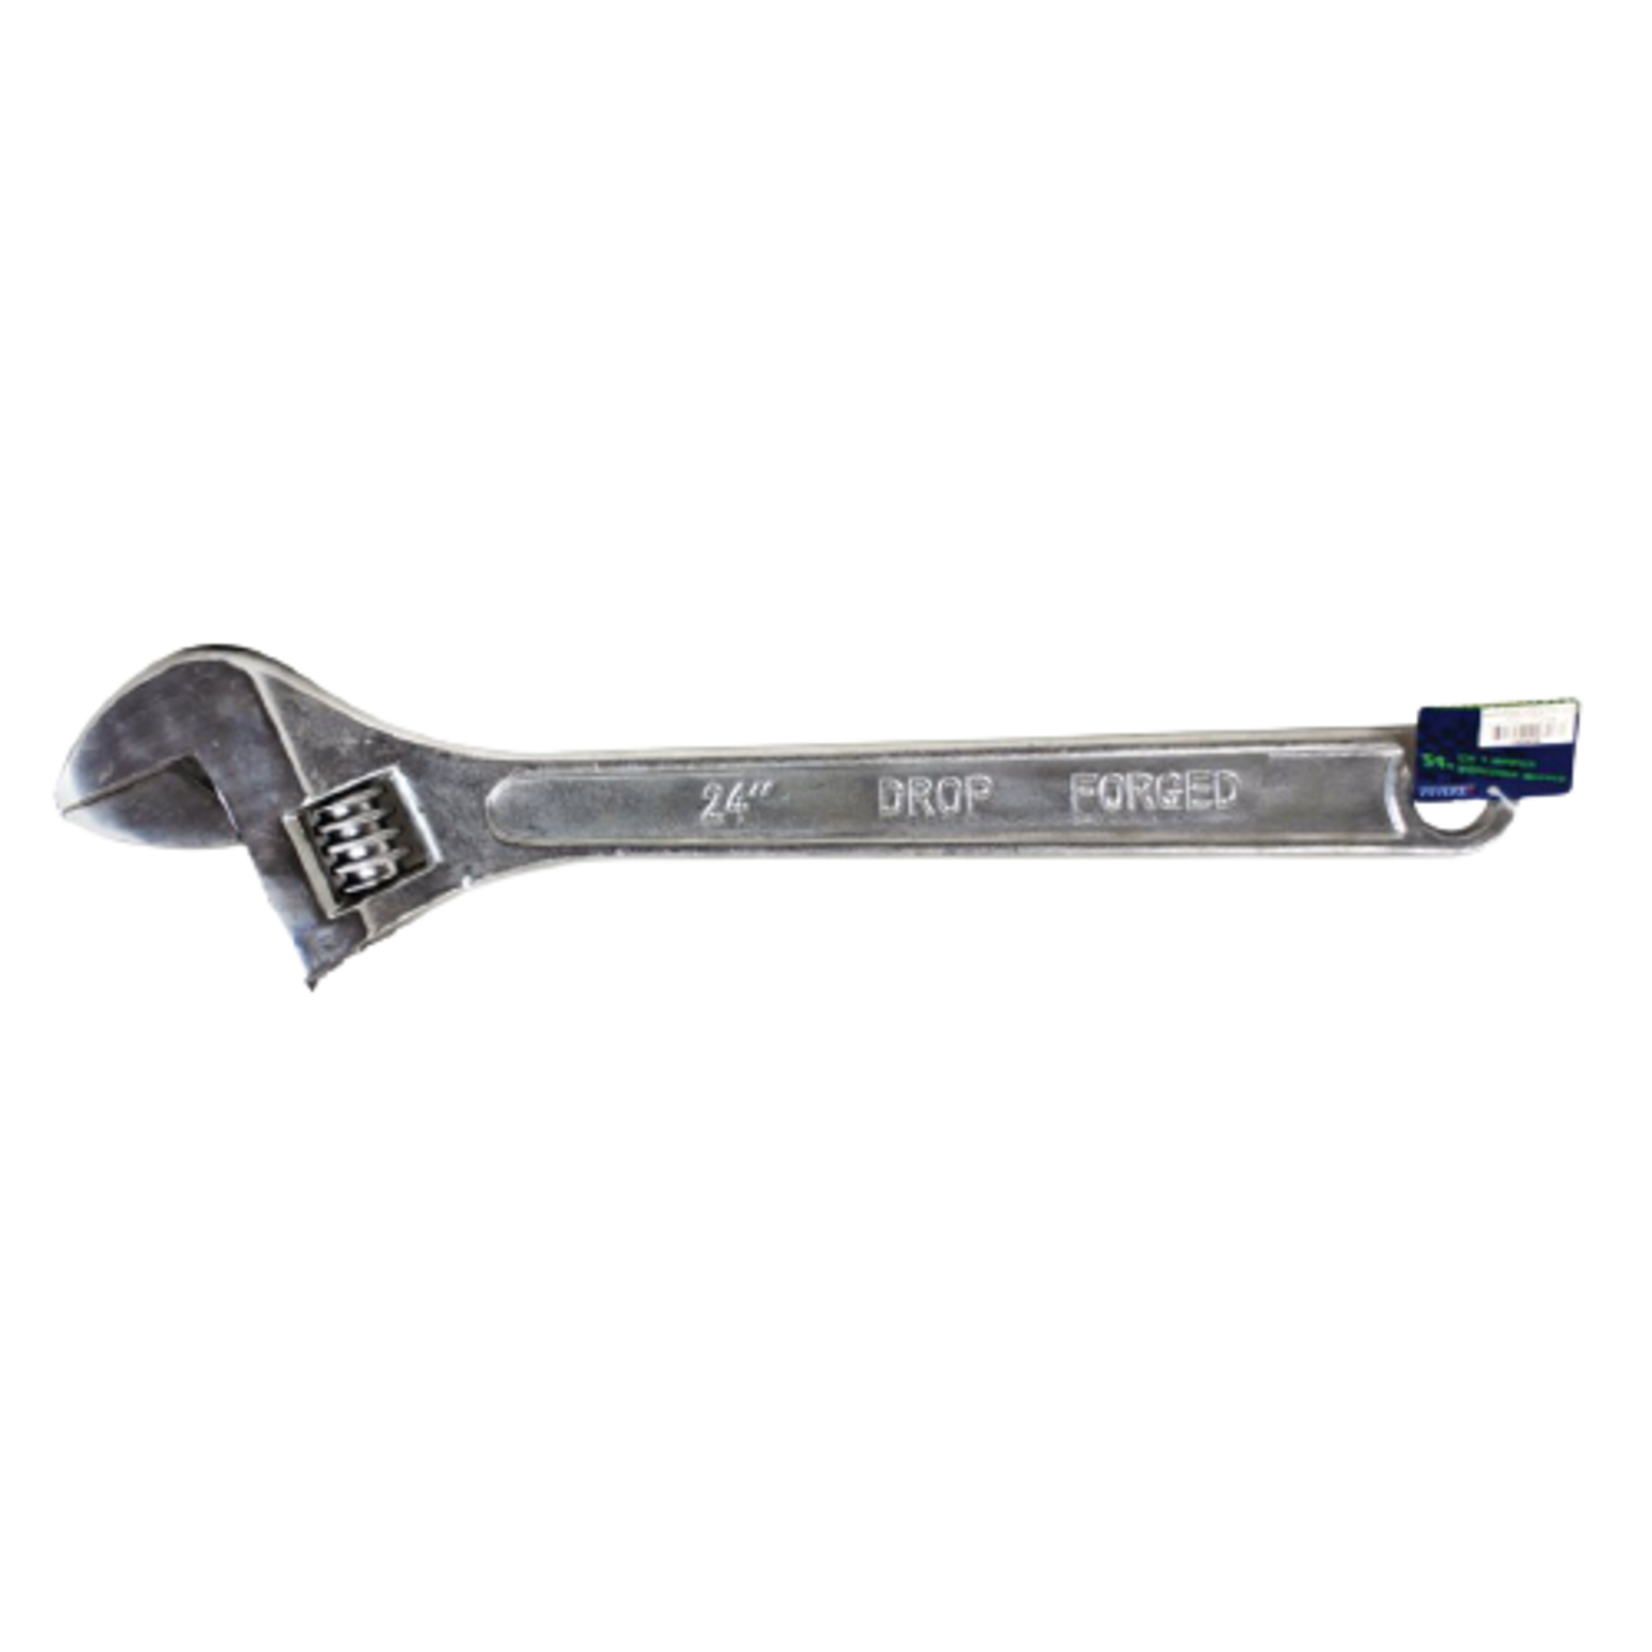 12IN ADJUSTABLE WRENCH